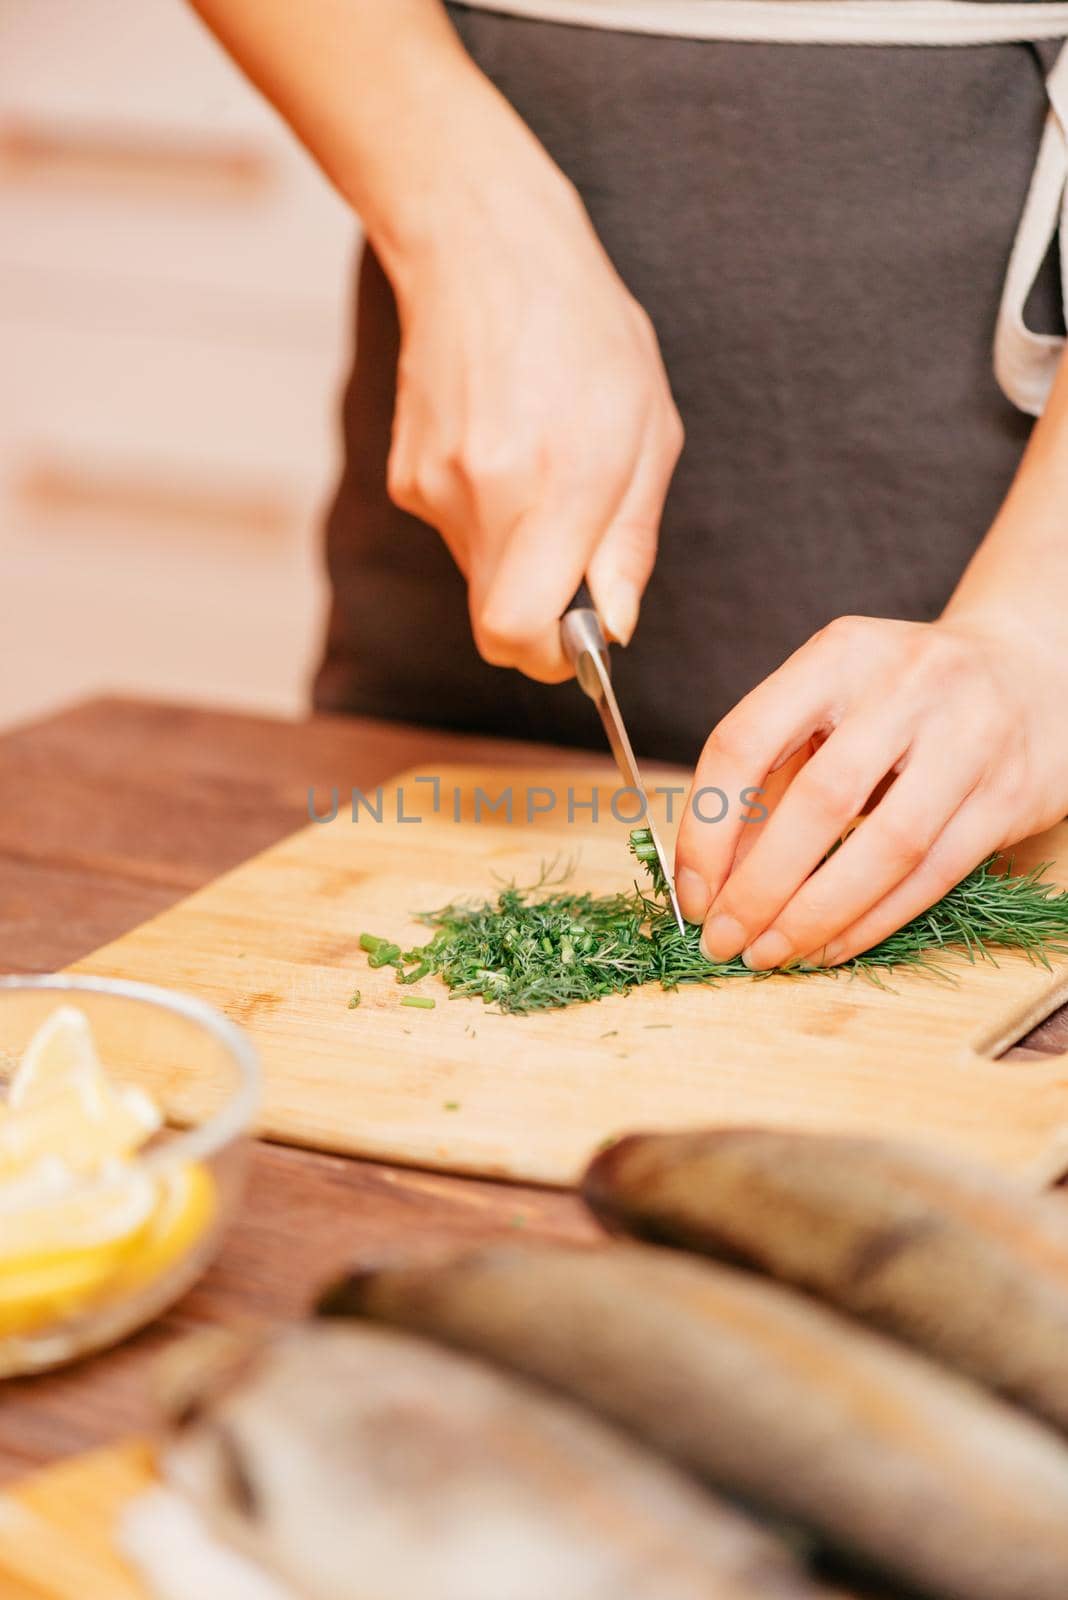 Woman cutting greenery on wooden board in the kitchen for fish dish, view of hands.